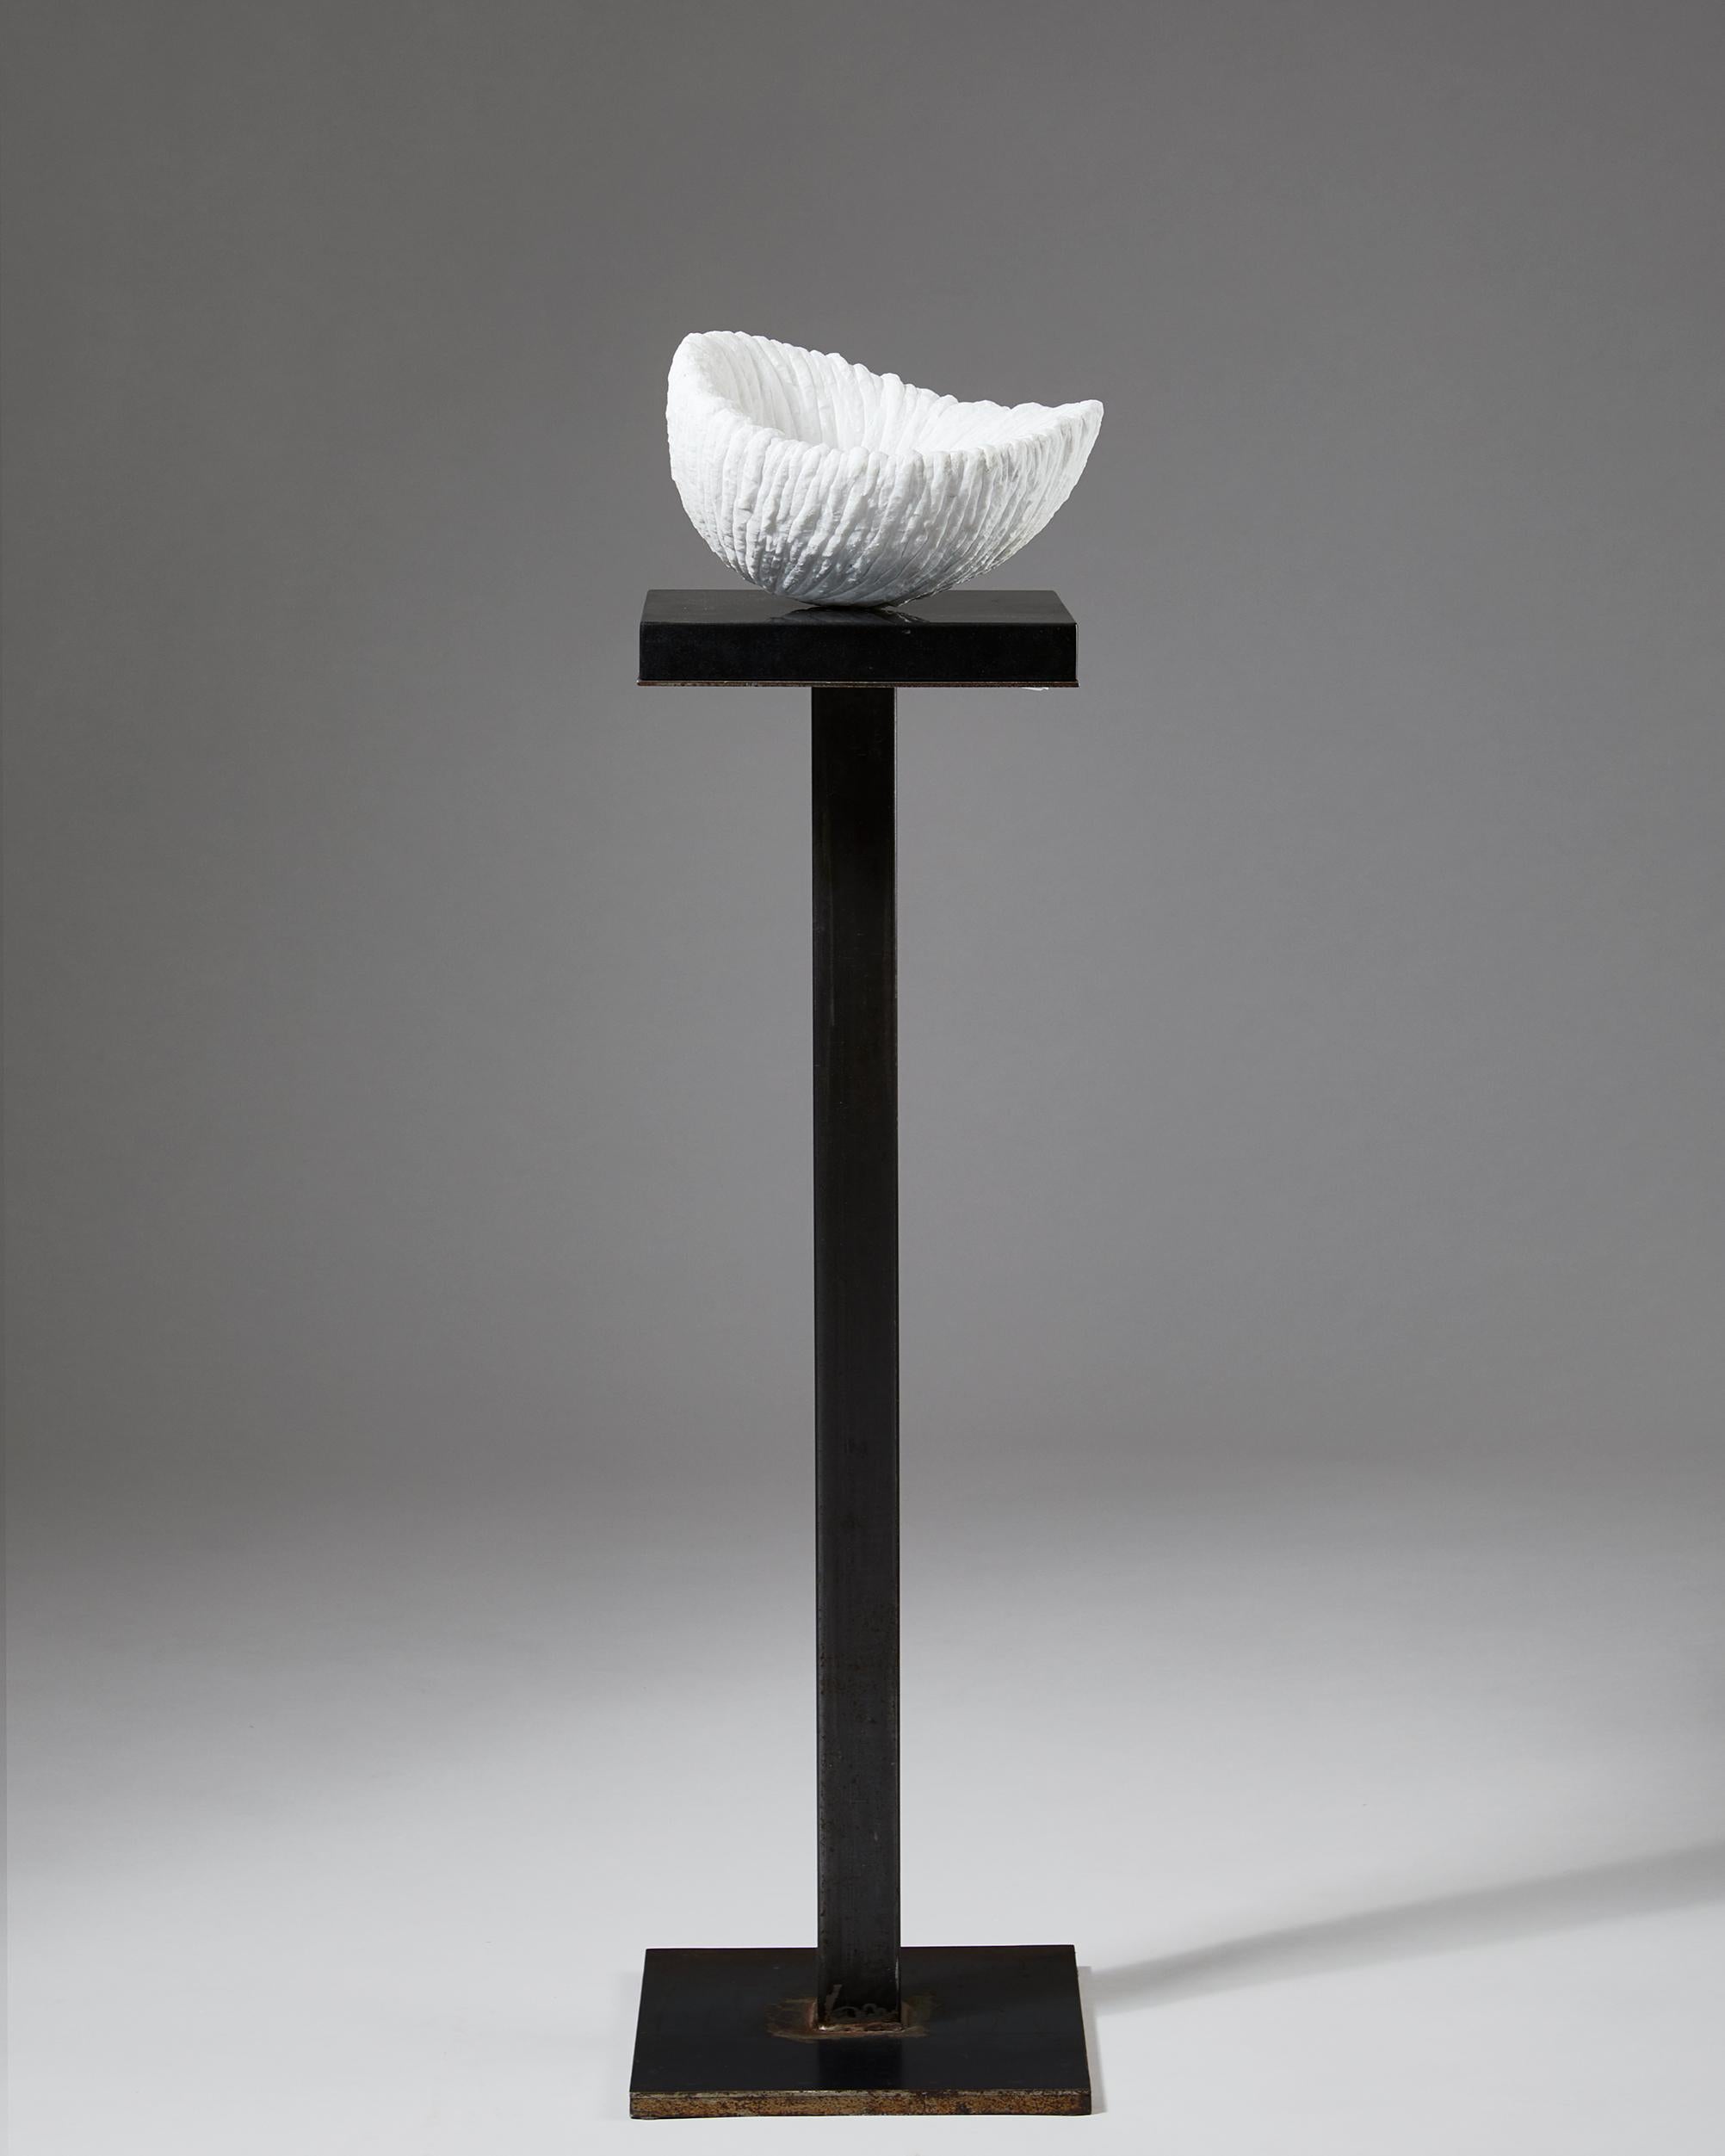 Sweden. 2014.
Marble and steel.

Measures: H 124 cm/ 4' 1 1/4